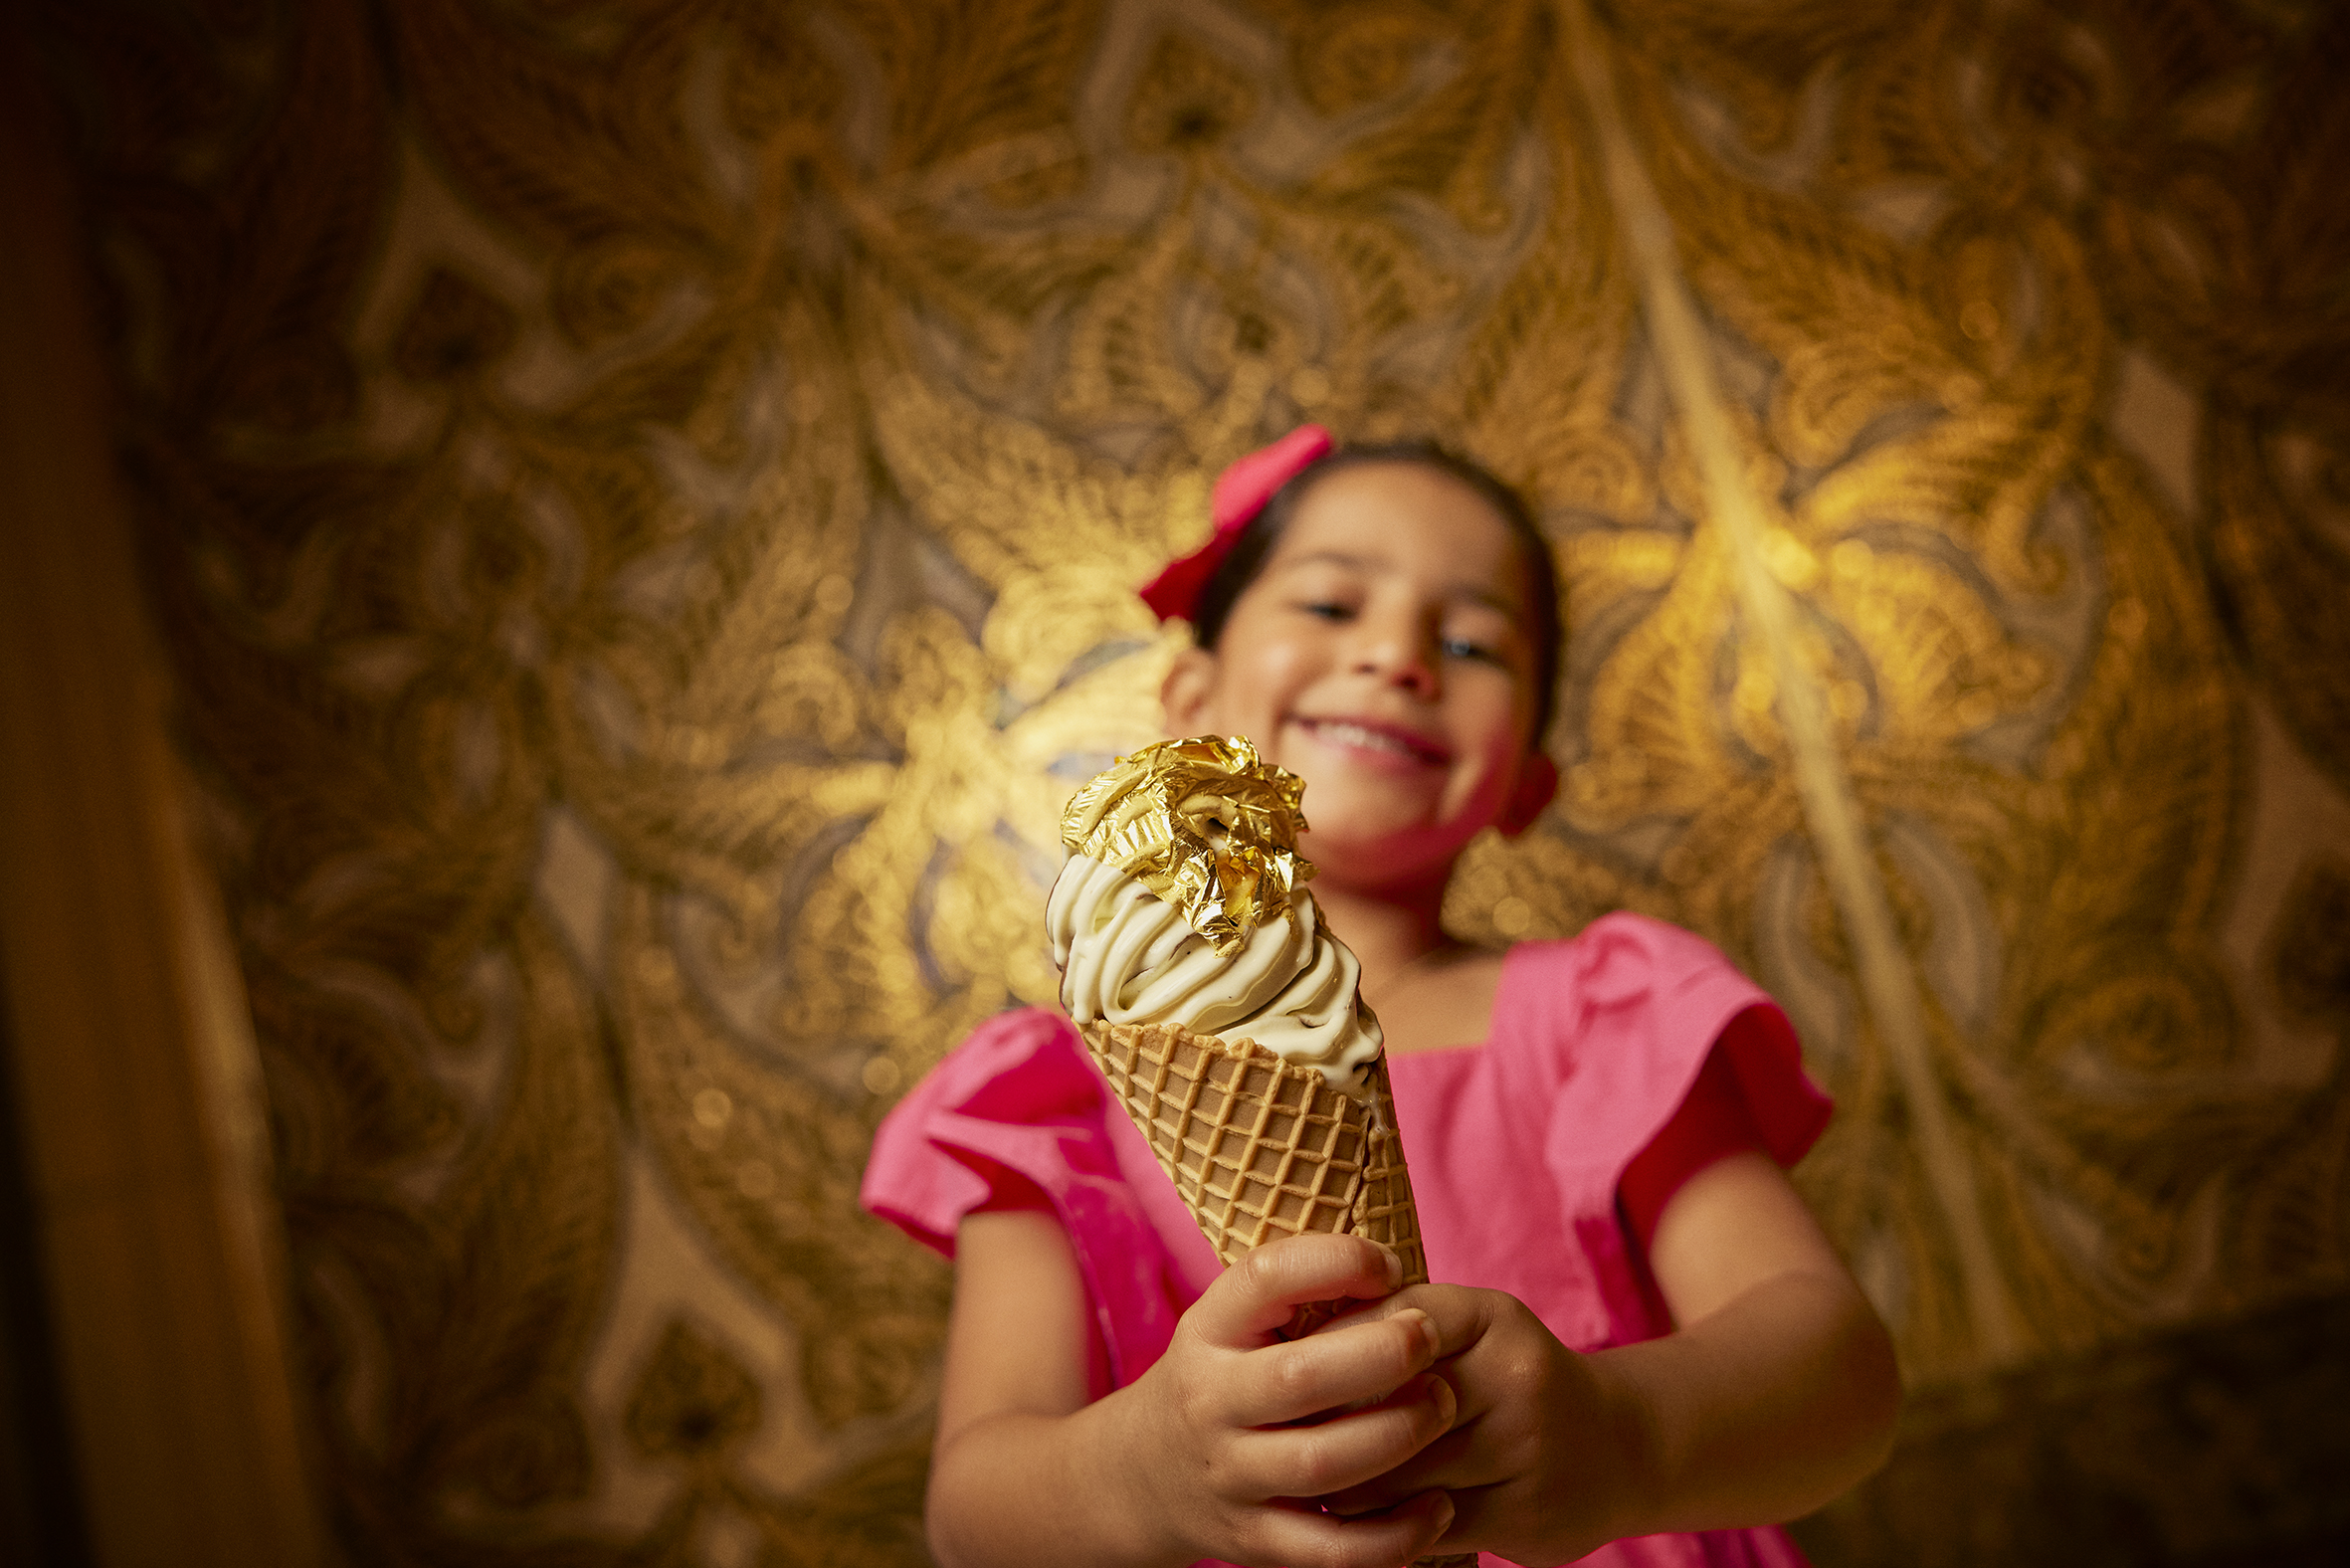 A small girl is holding an ice cream